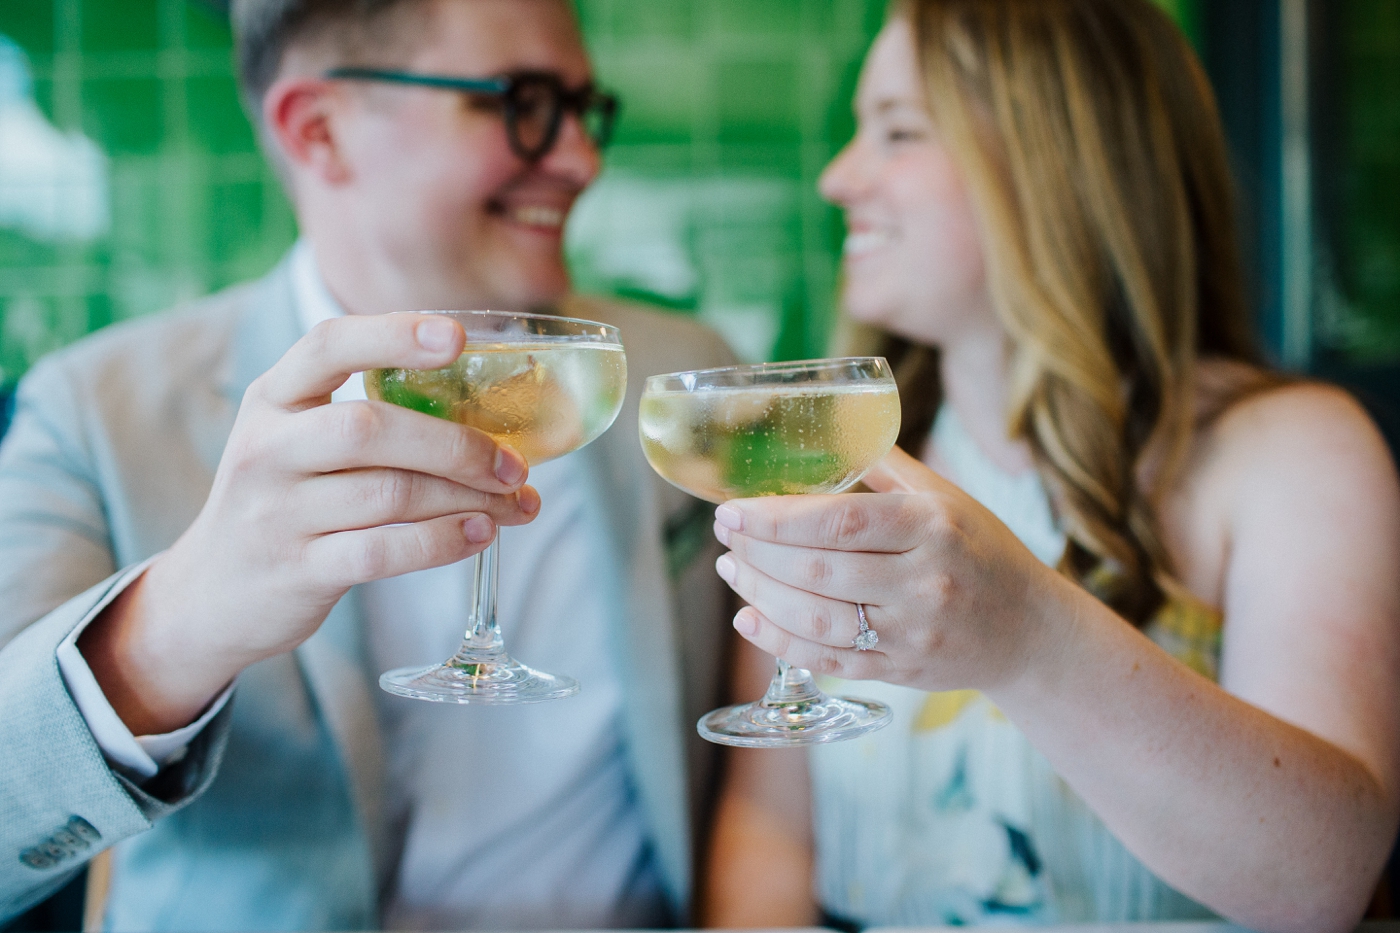 Maddie & Henry’s Engagement Session at The Bread and the Butterfly Café in Atlanta by Izzy & Co.